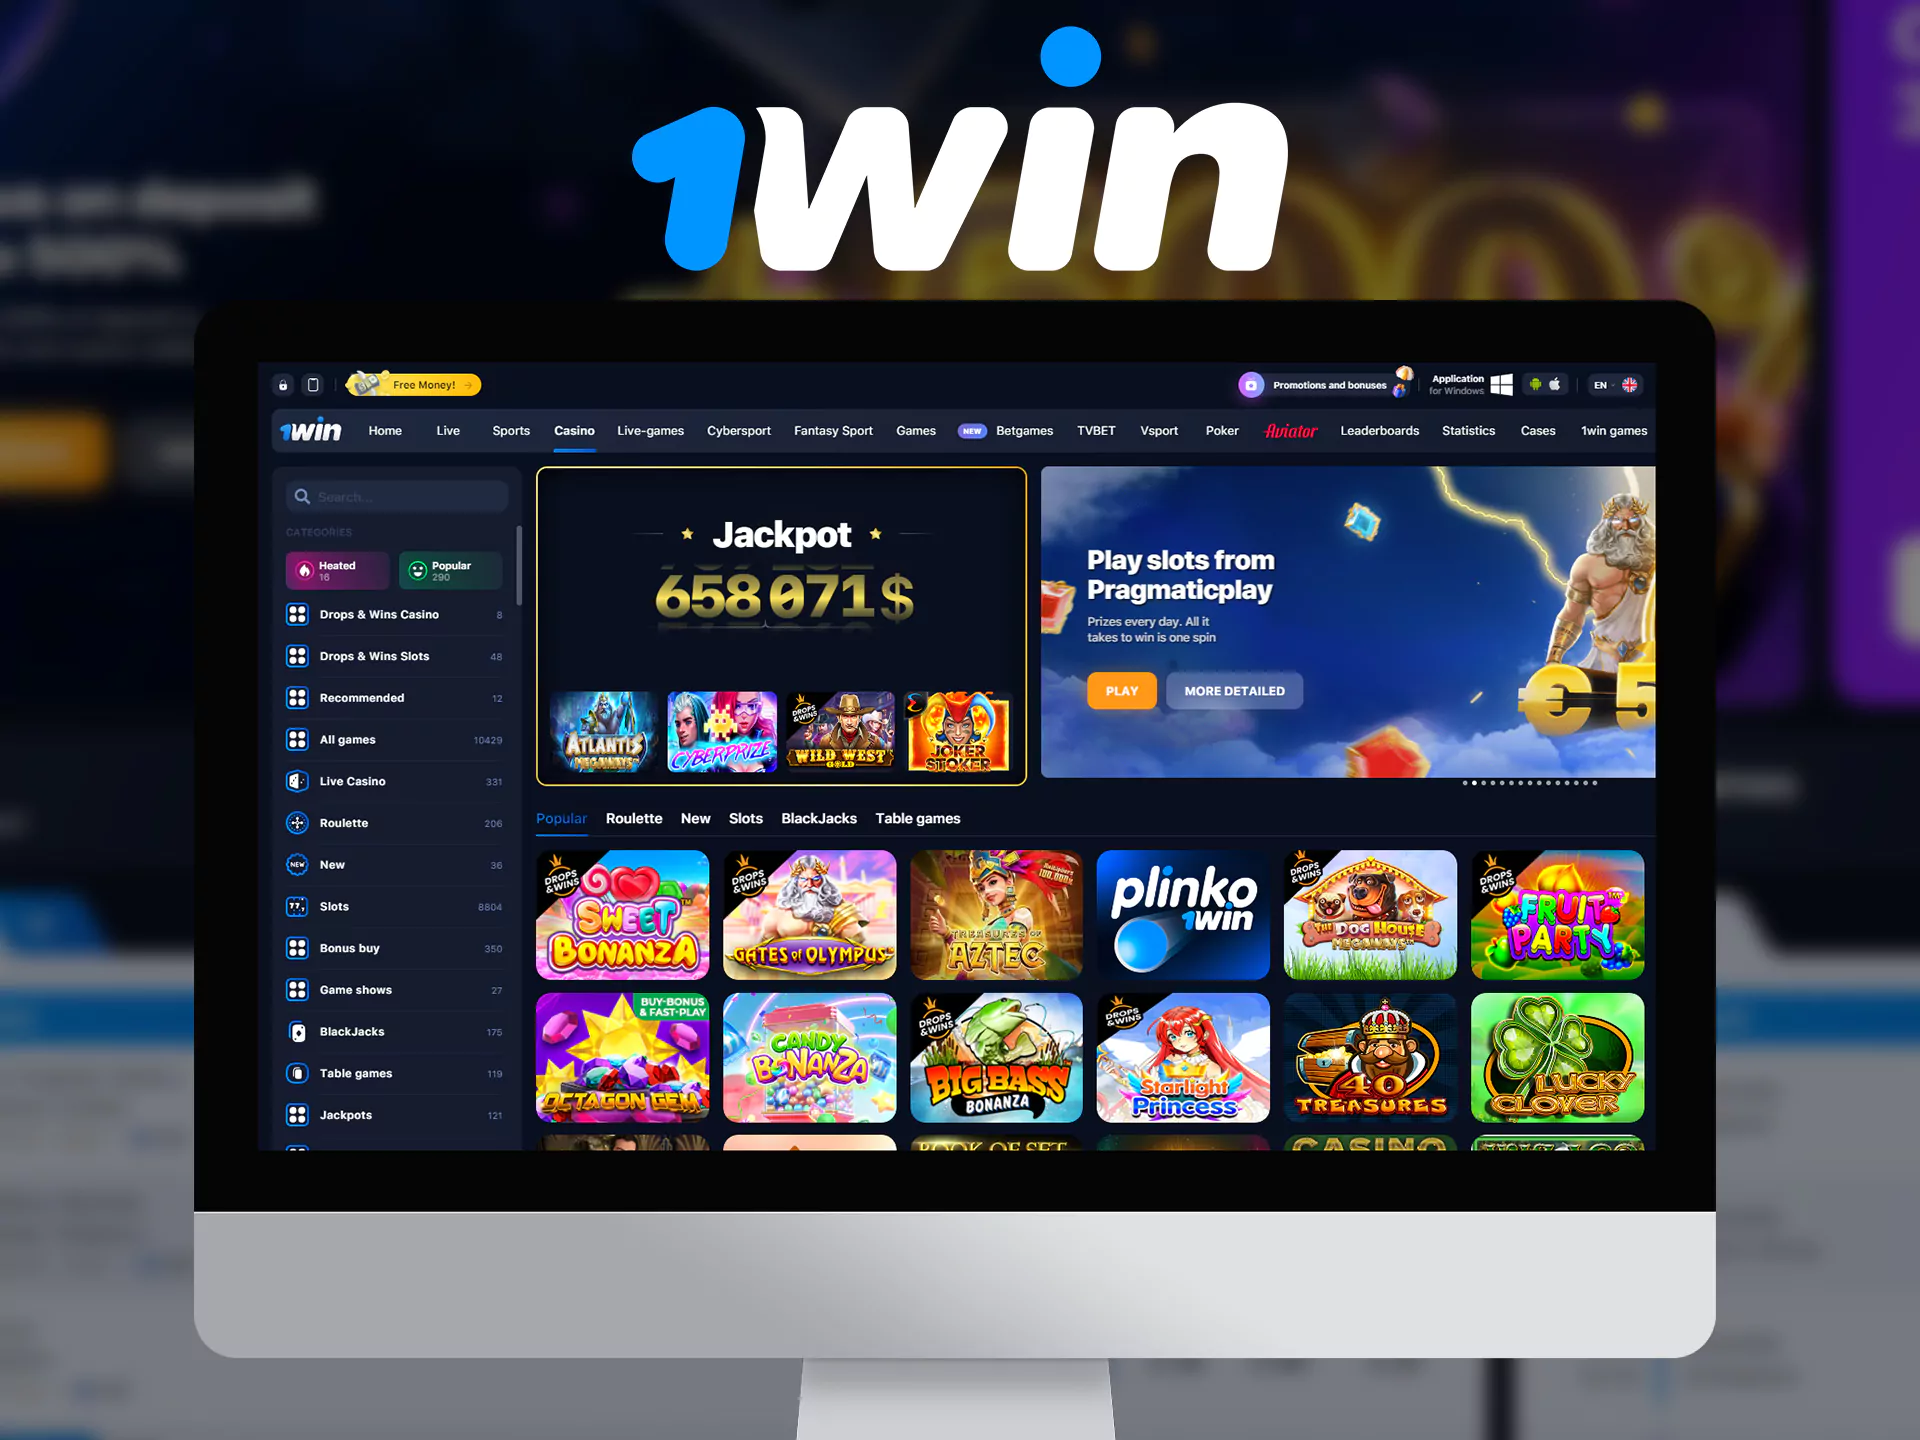 Use the 1win website with your PC.